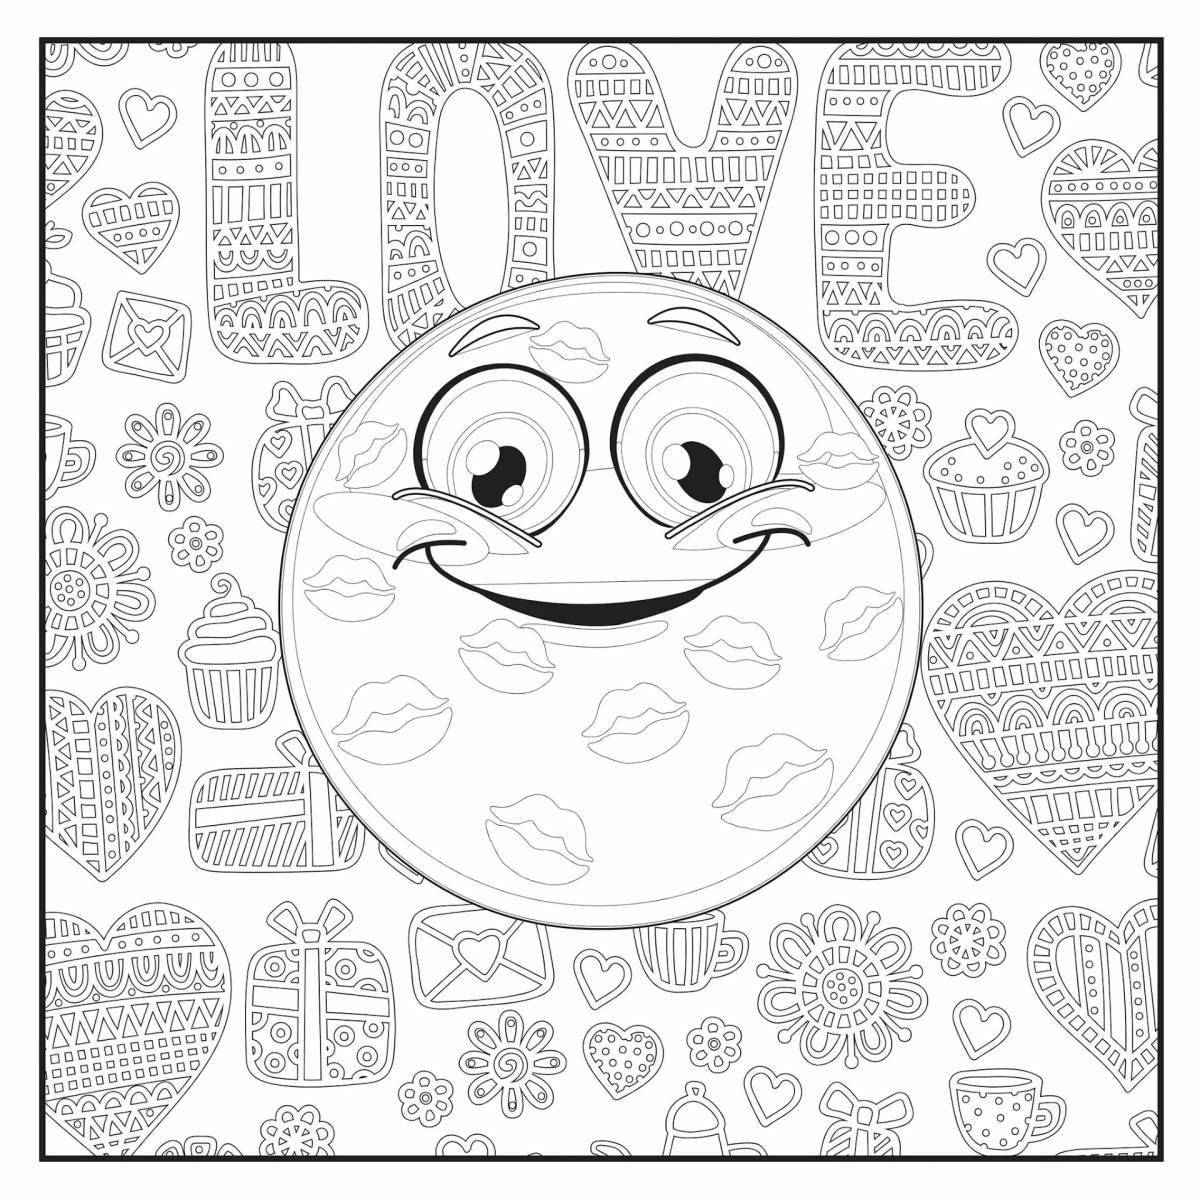 Funny indie kid emoticon coloring pages